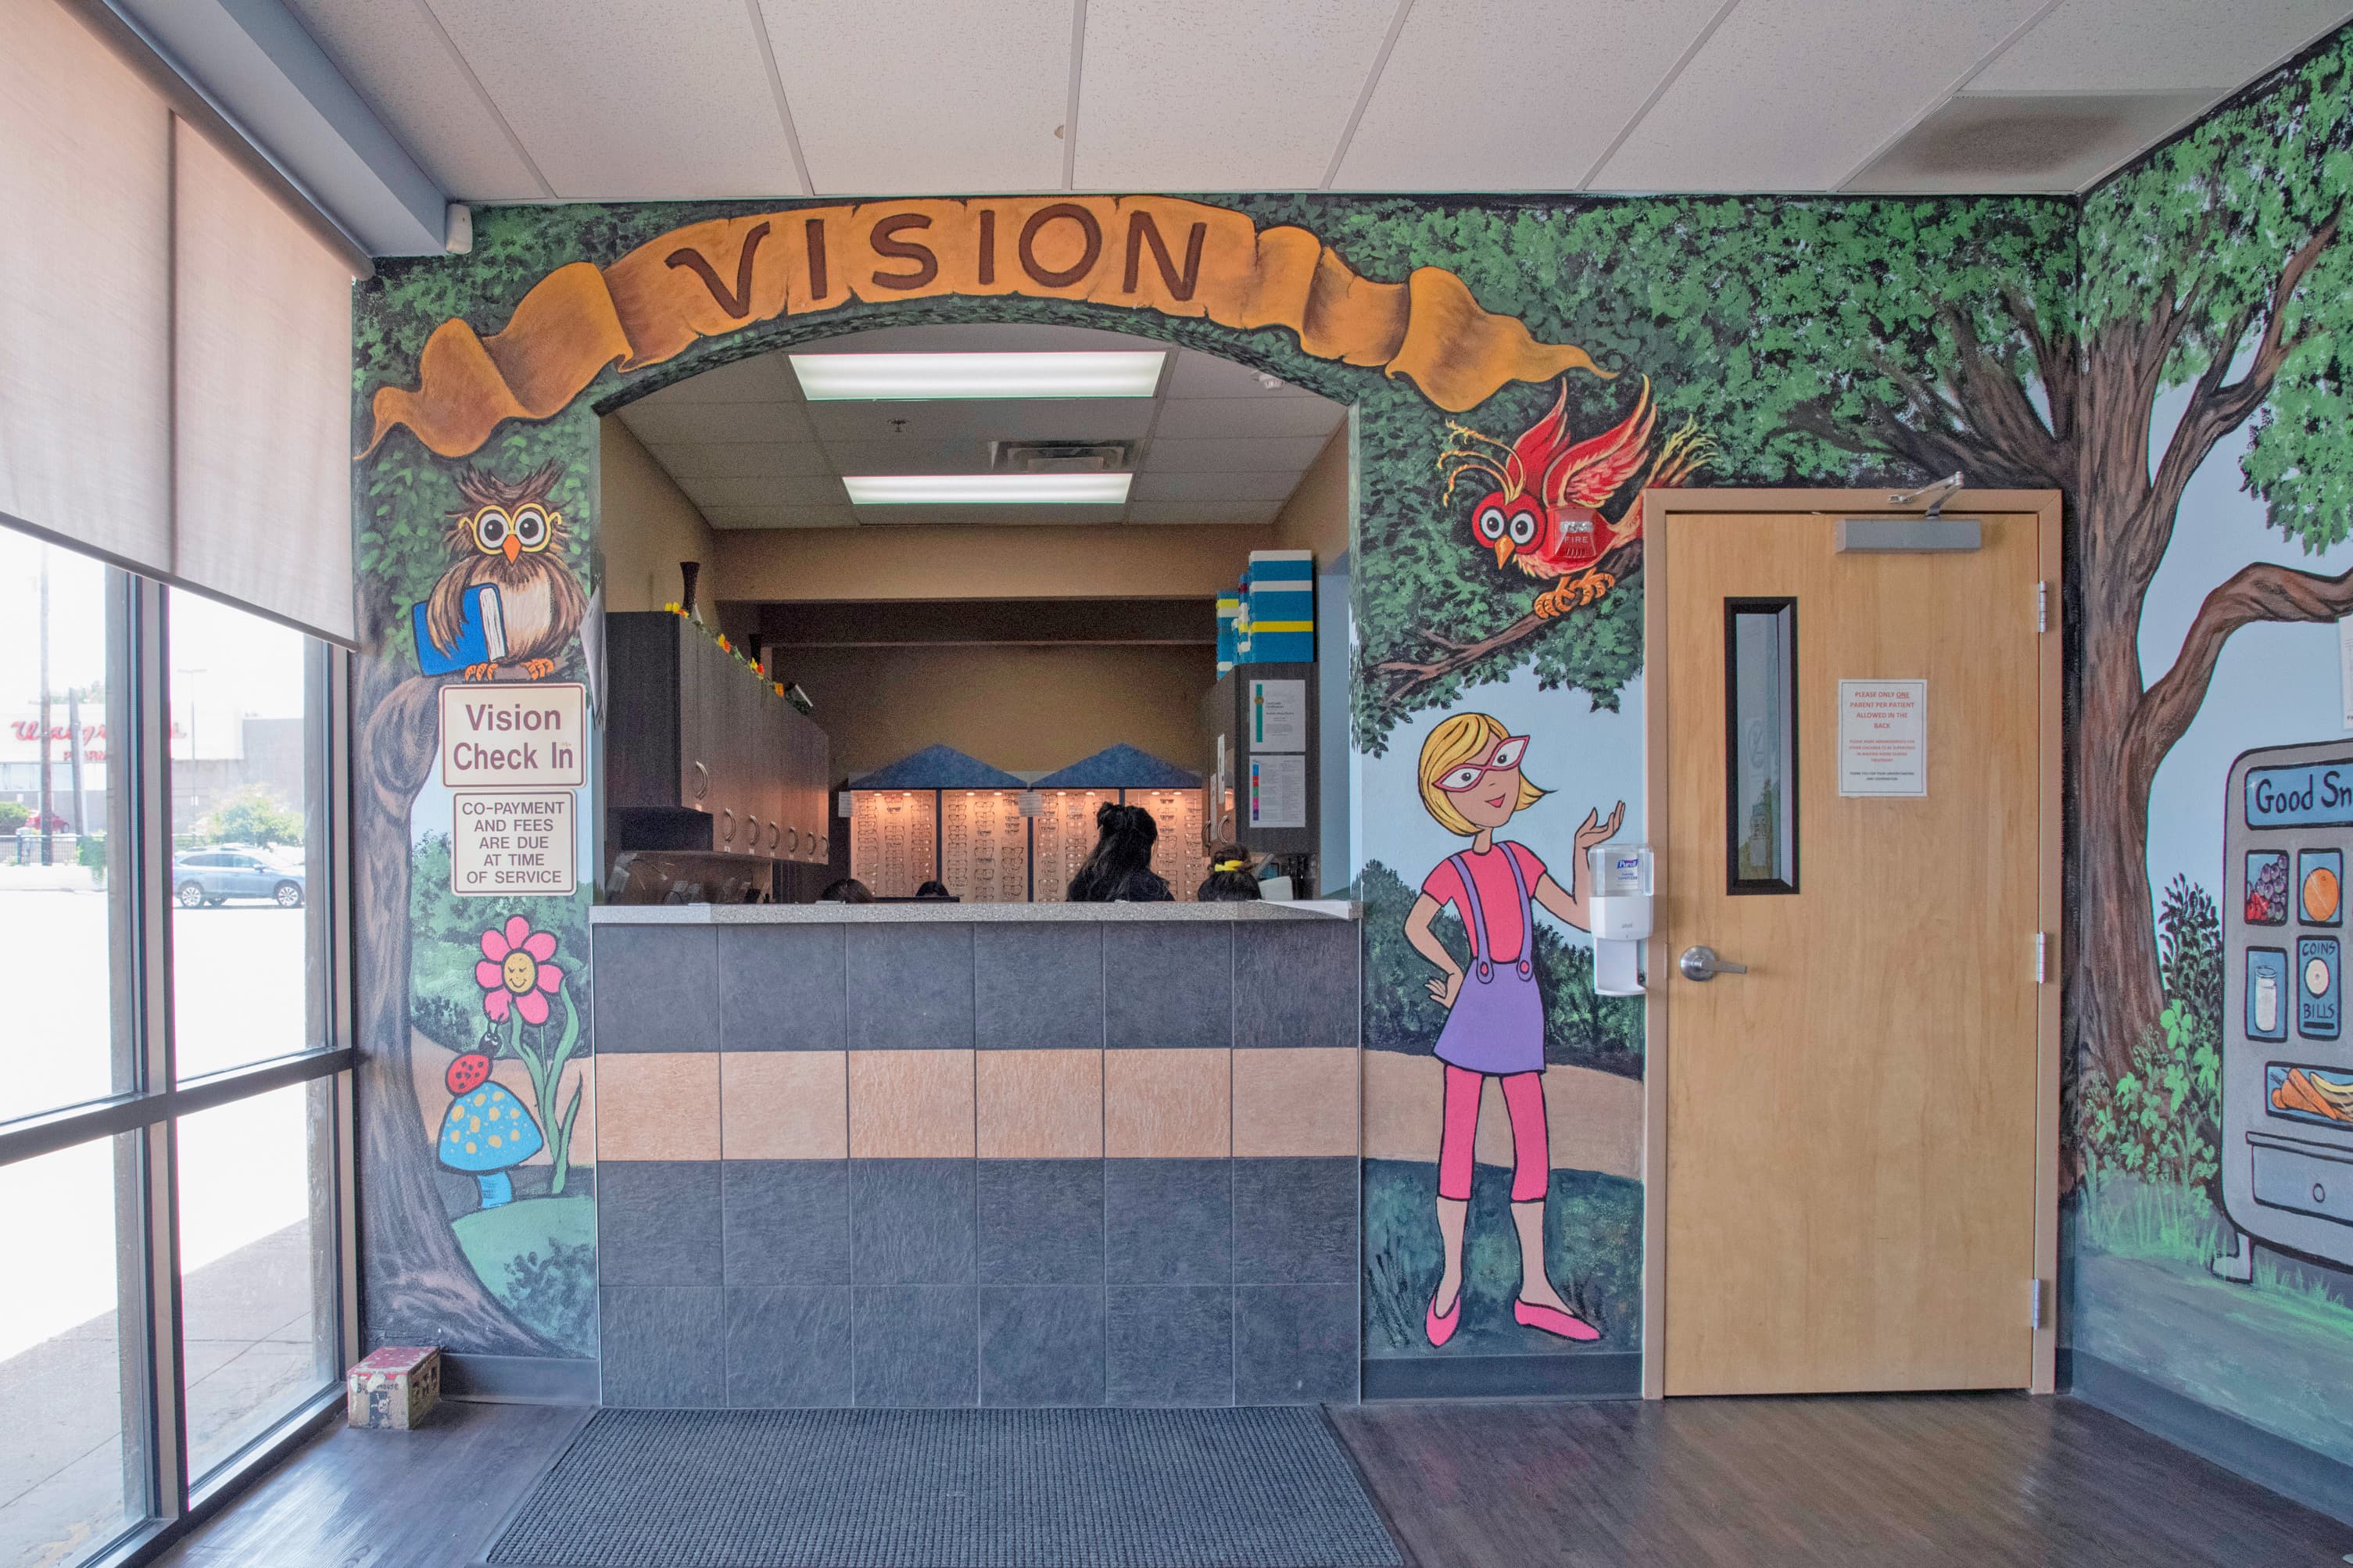 reception desk that says kid's vision with cartoon characters